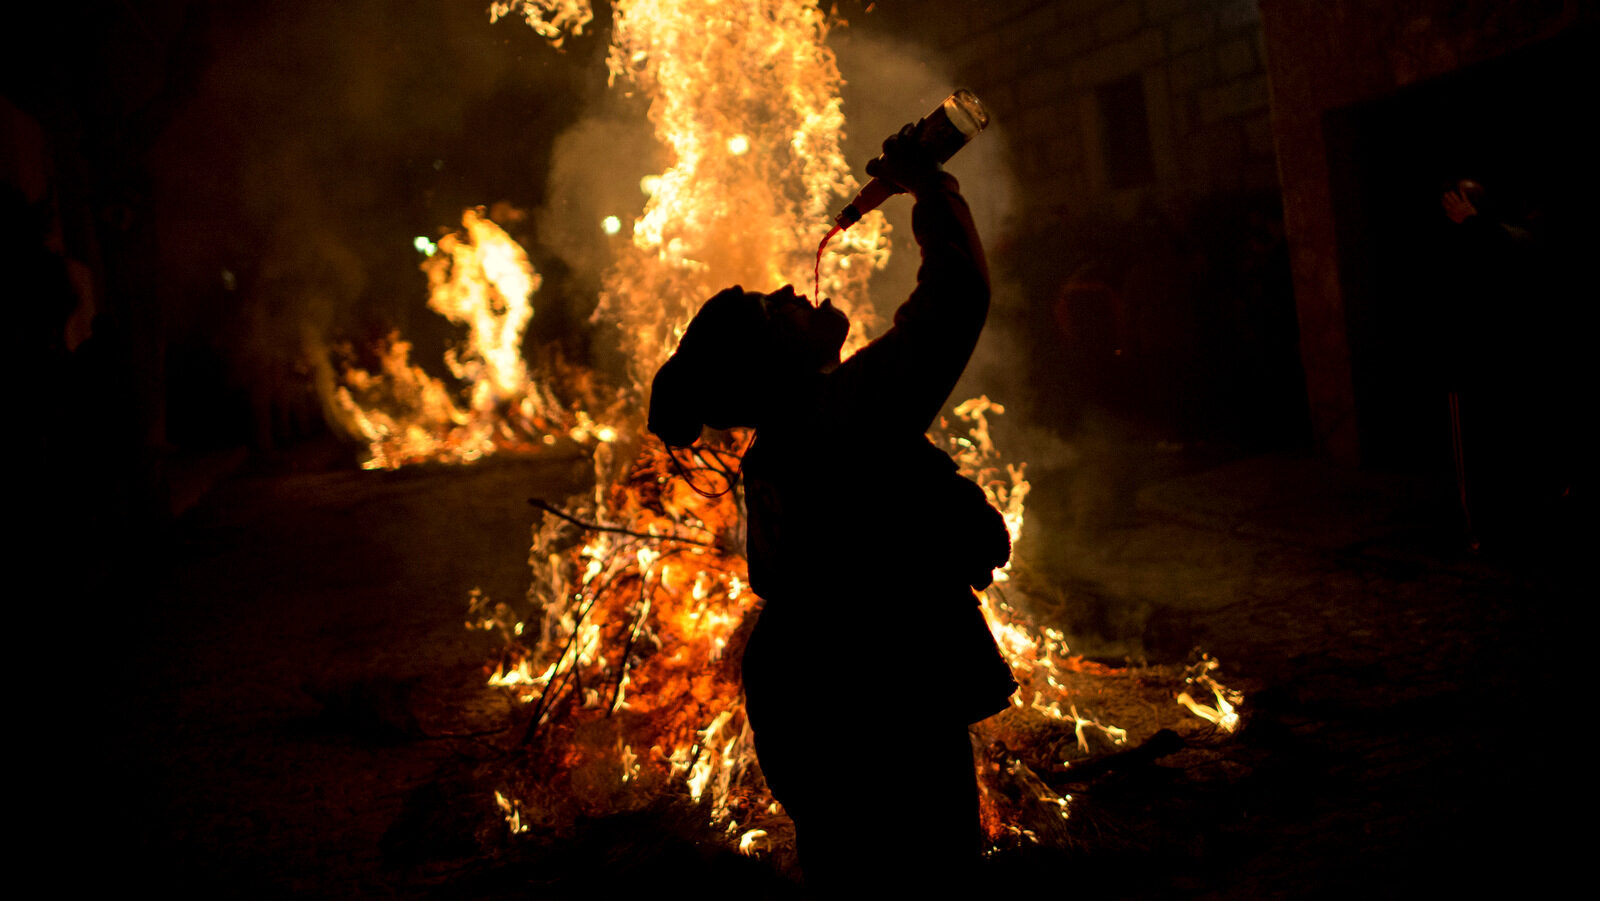 A woman drinks wine man next to a bonfire as part of a ritual in honor of Saint Anthony the Abbot, the patron saint of domestic animals, in San Bartolome de Pinares, about 100 km west of Madrid, Spain on Monday, Jan. 16, 2017. On the eve of Saint Anthony's Day, hundreds ride their horses through the narrow cobblestone streets of the small village of San Bartolome during the "Luminarias," a tradition that dates back 500 years and is meant to purify the animals with the smoke of the bonfires and protect them for the year to come. (AP Photo/Emilio Morenatti)